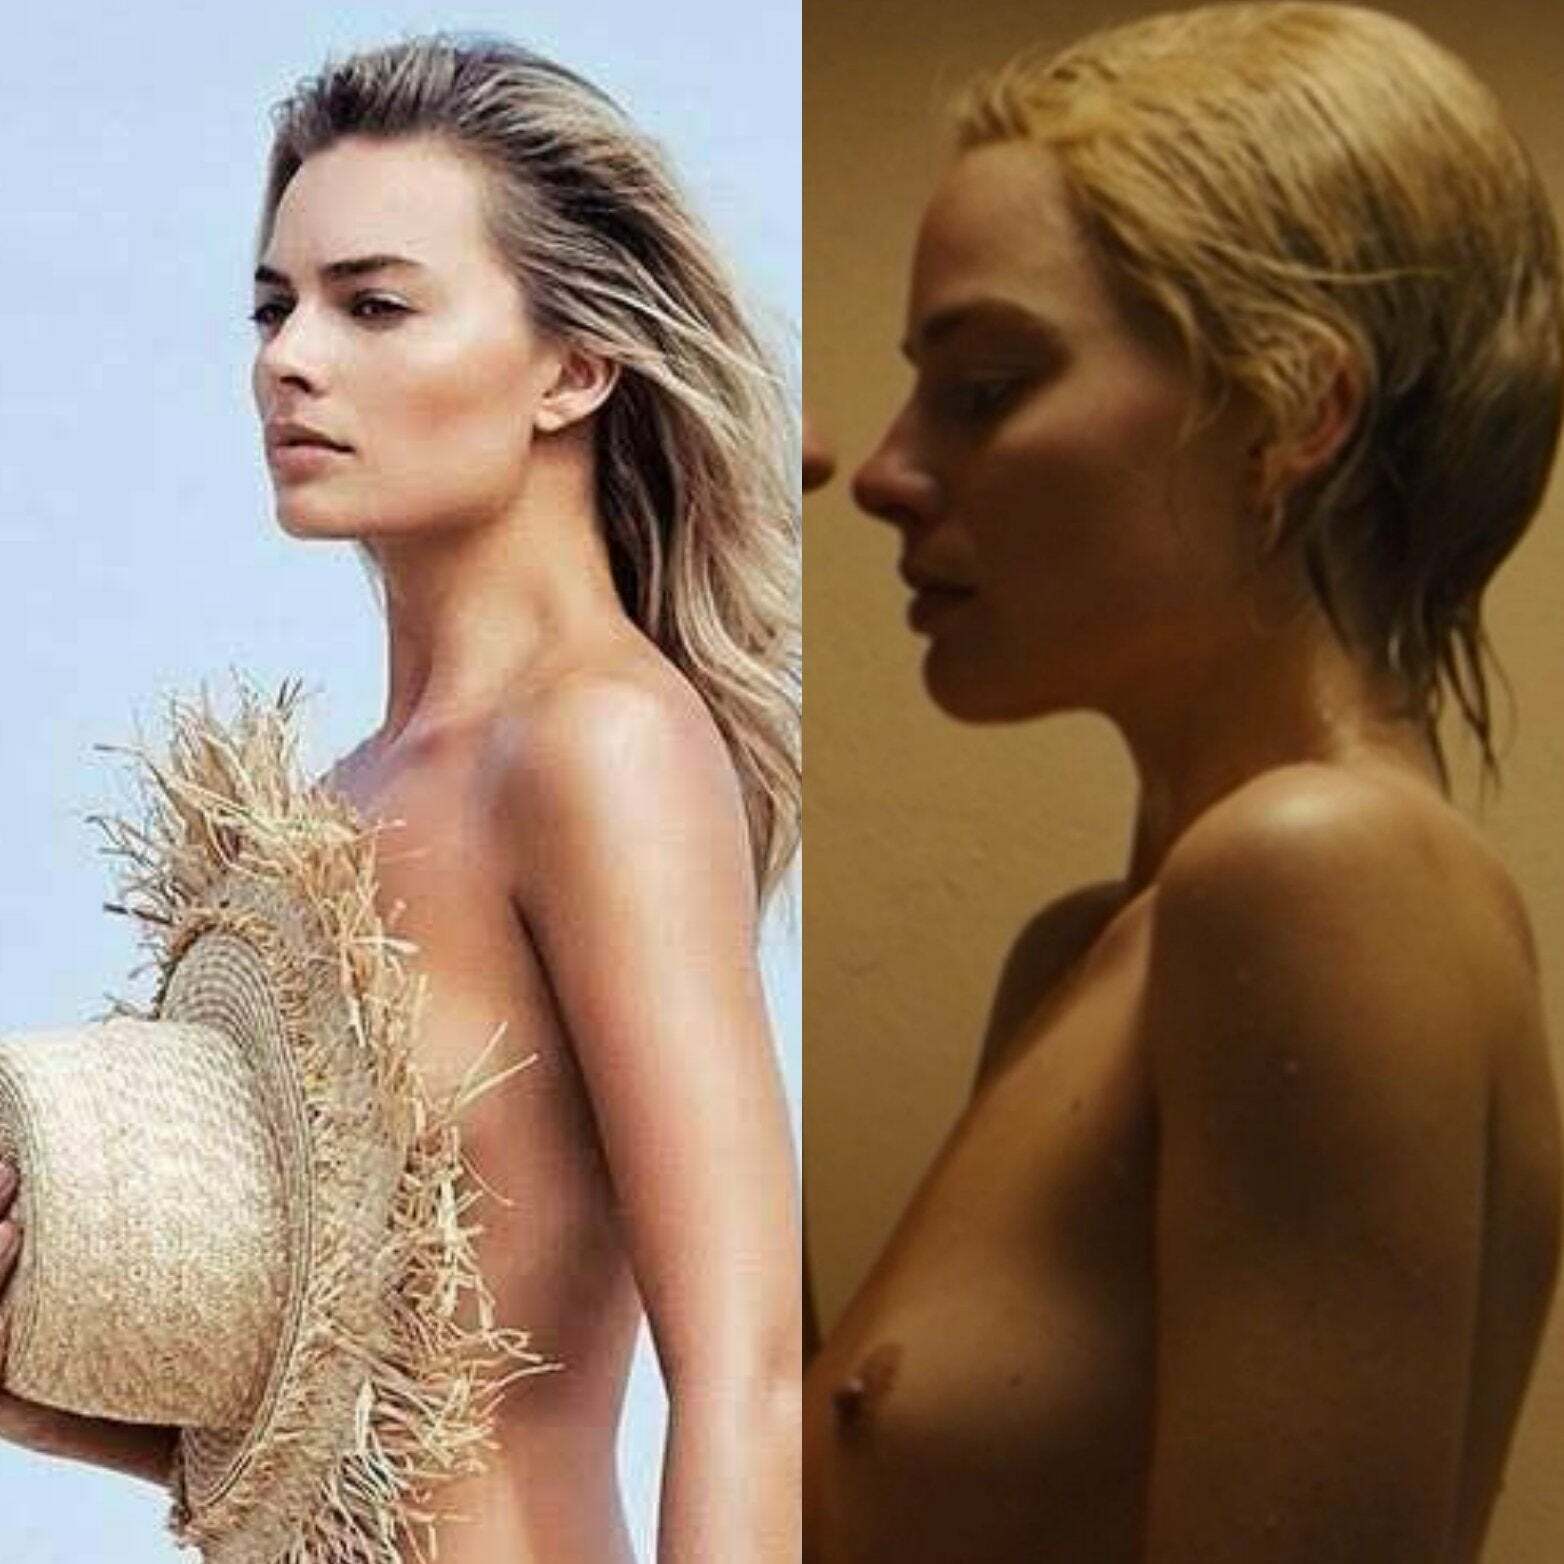 Margot Robbie getting her perky tits out again